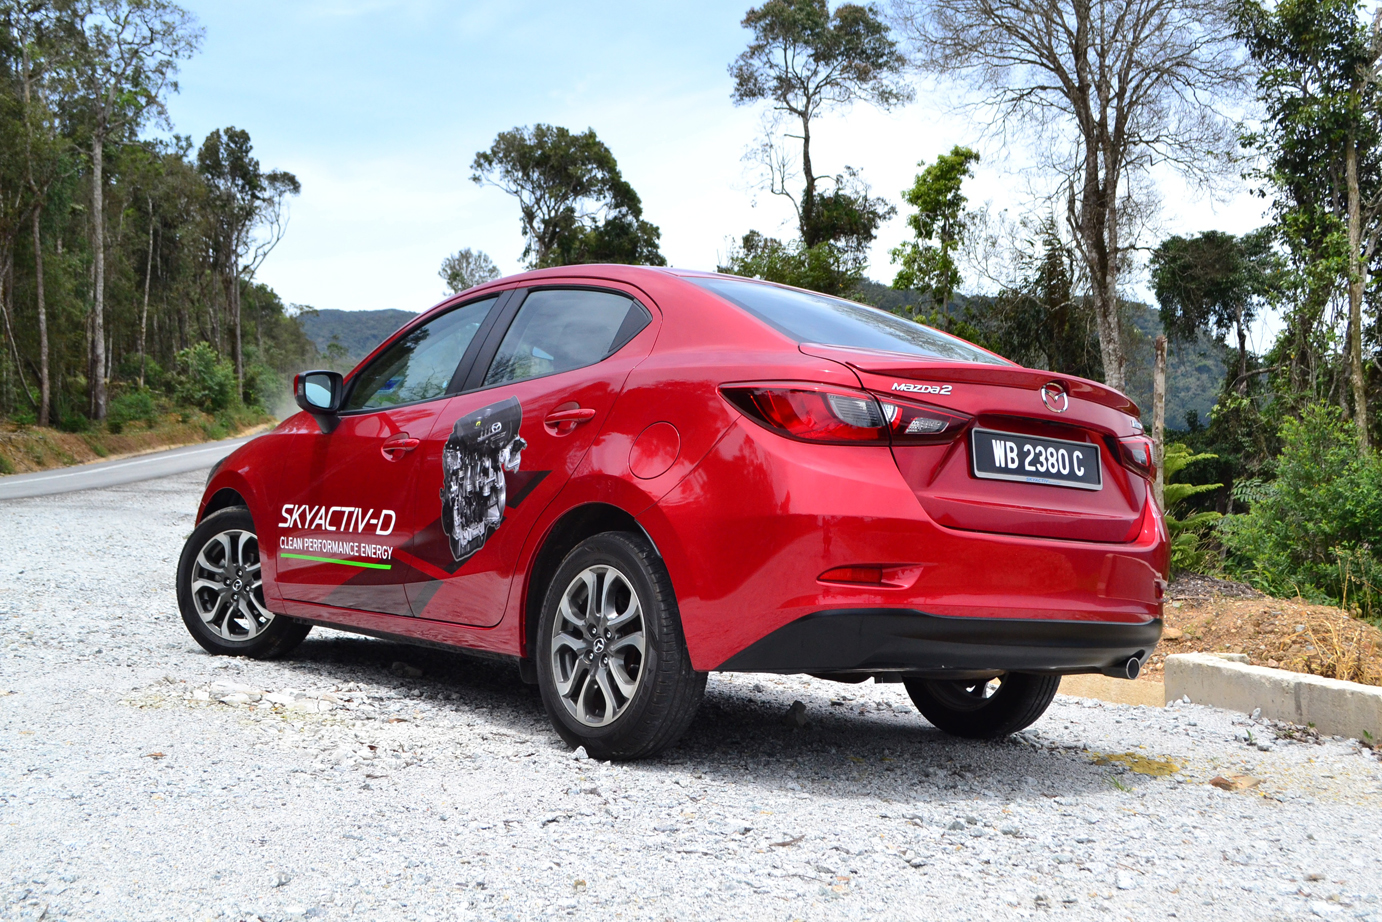 The Mazda 2 Skyactiv D Sedan Great Things Come In Small